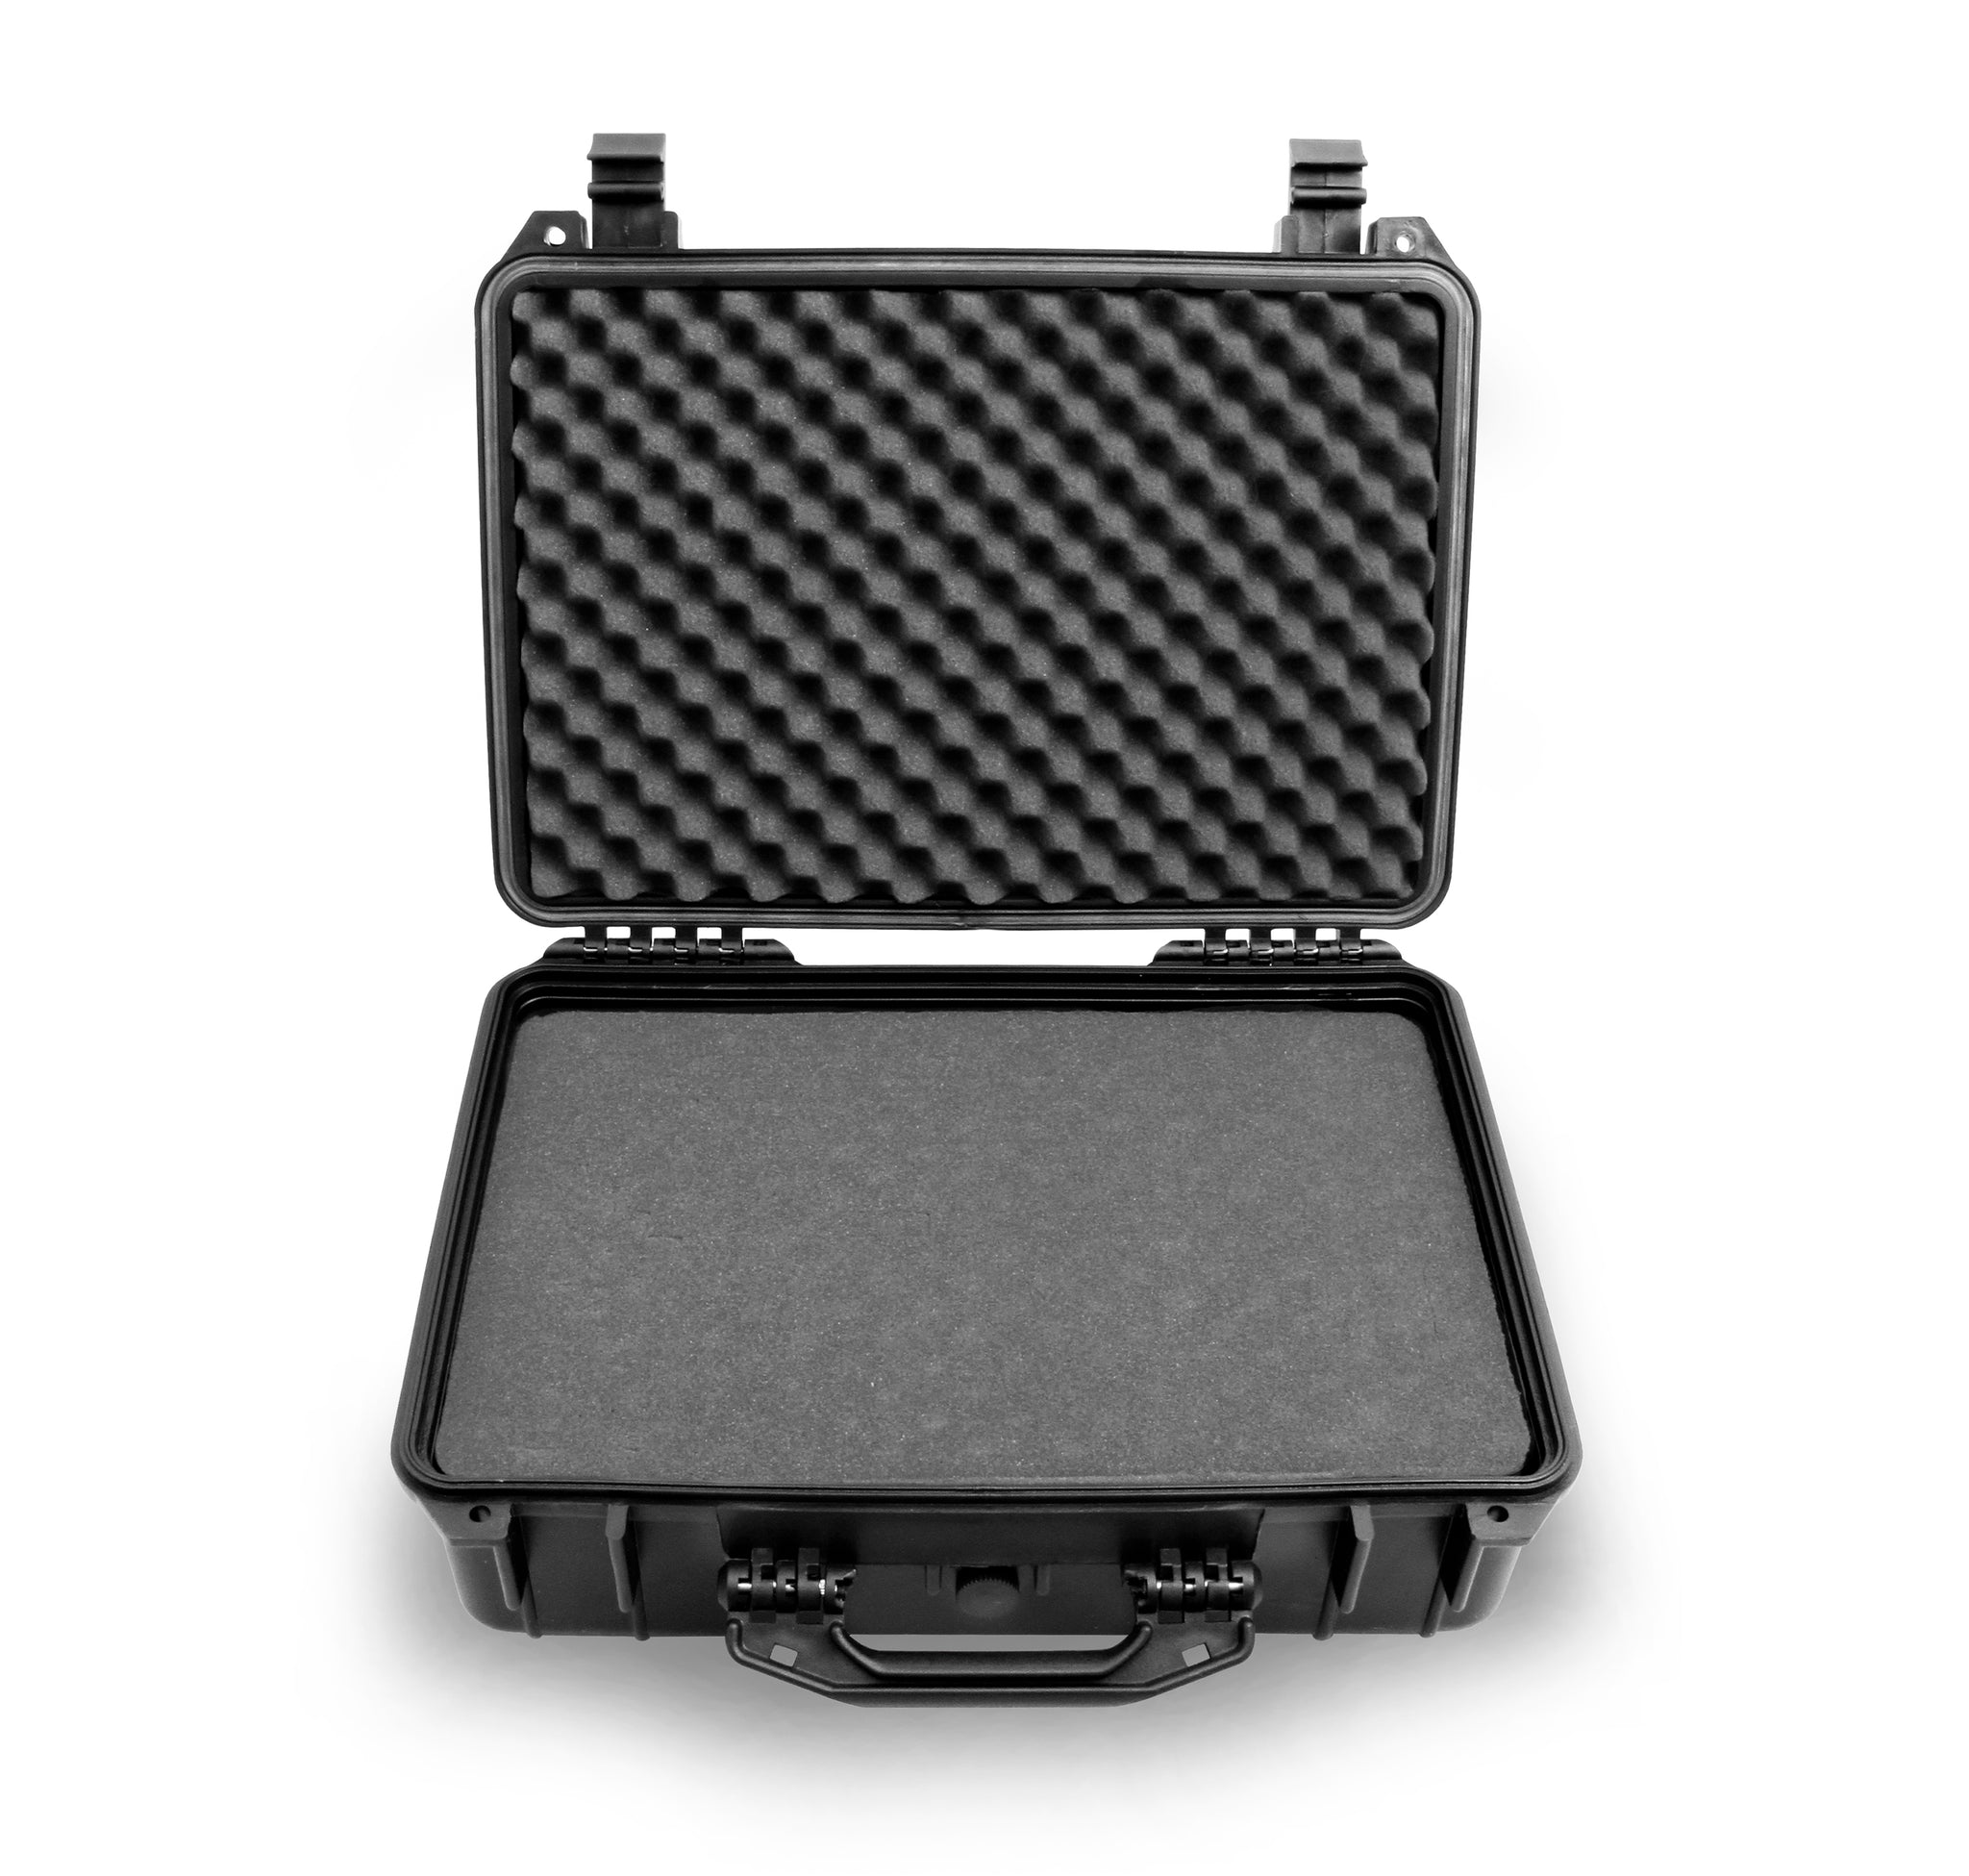 Casematix Travel Case for Hatch Rest Sound Machine Night Light or Hatch Rest+ Portable Dream Machine - Includes Turquoise Carry Case Only, Size: 9.75